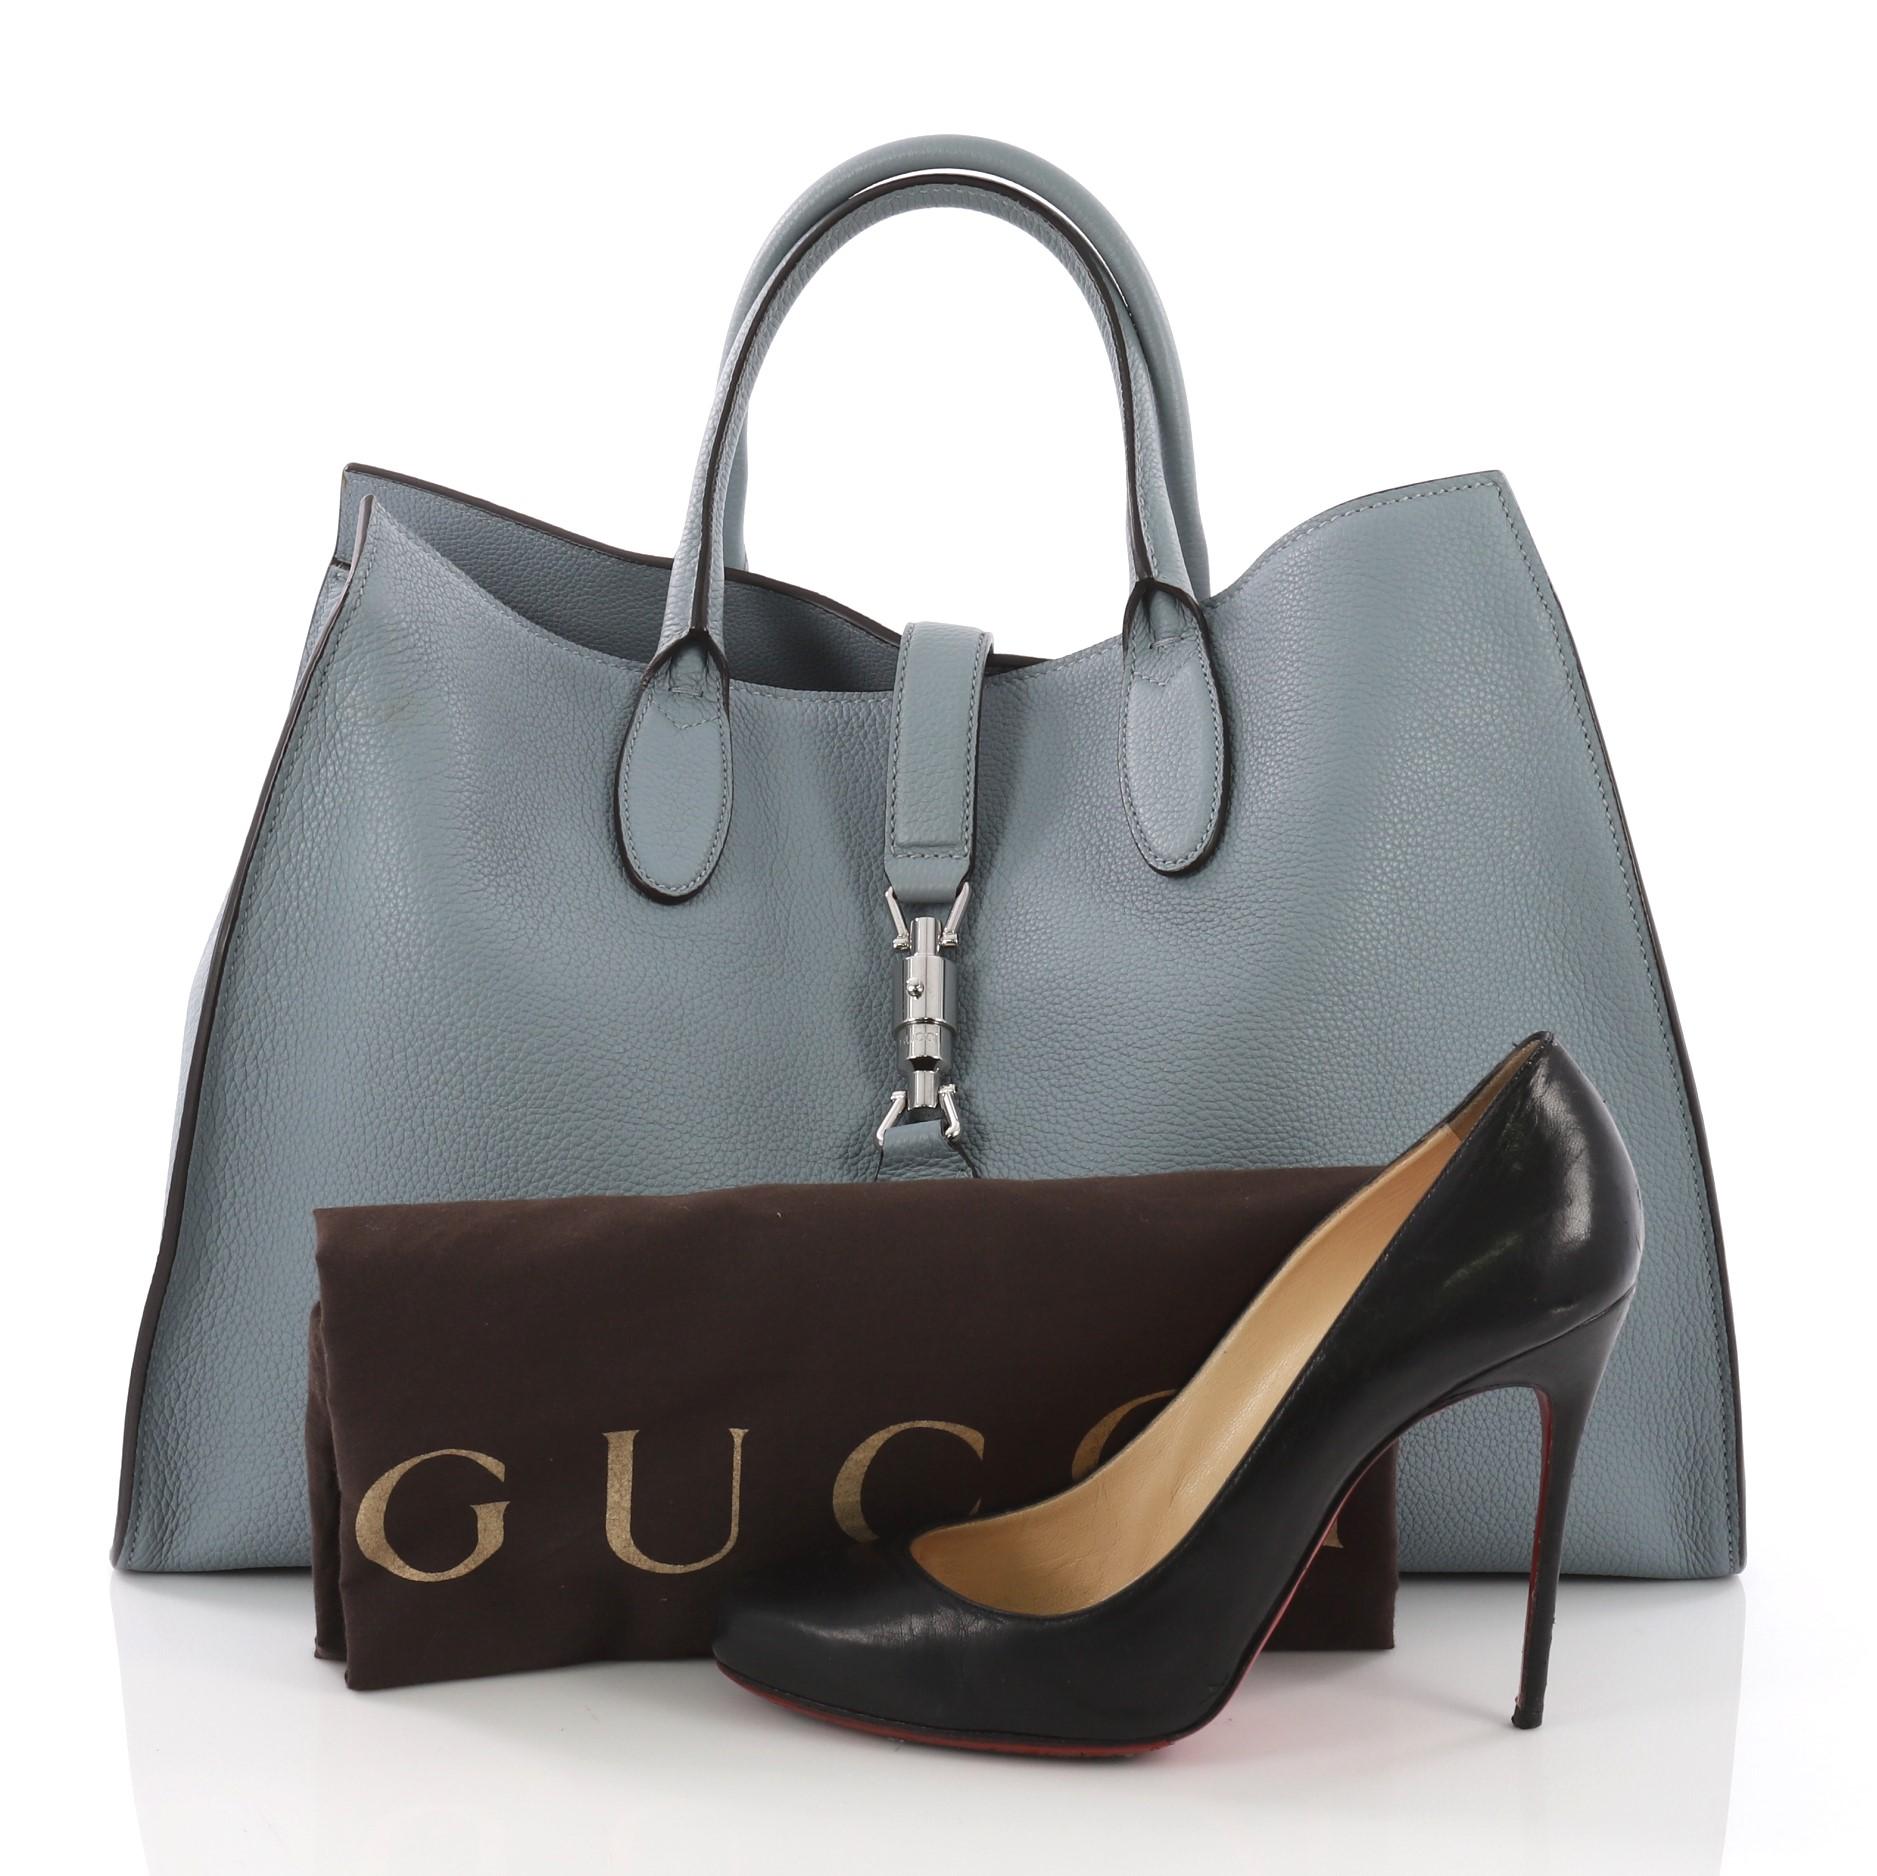 This Gucci Jackie Soft Tote Leather Large, crafted from blue soft leather, features a soft-structured silhouette, dual rolled handles, and silver-tone hardware. Its piston-lock closure opens to a blue raw leather interior with side zip pockets.